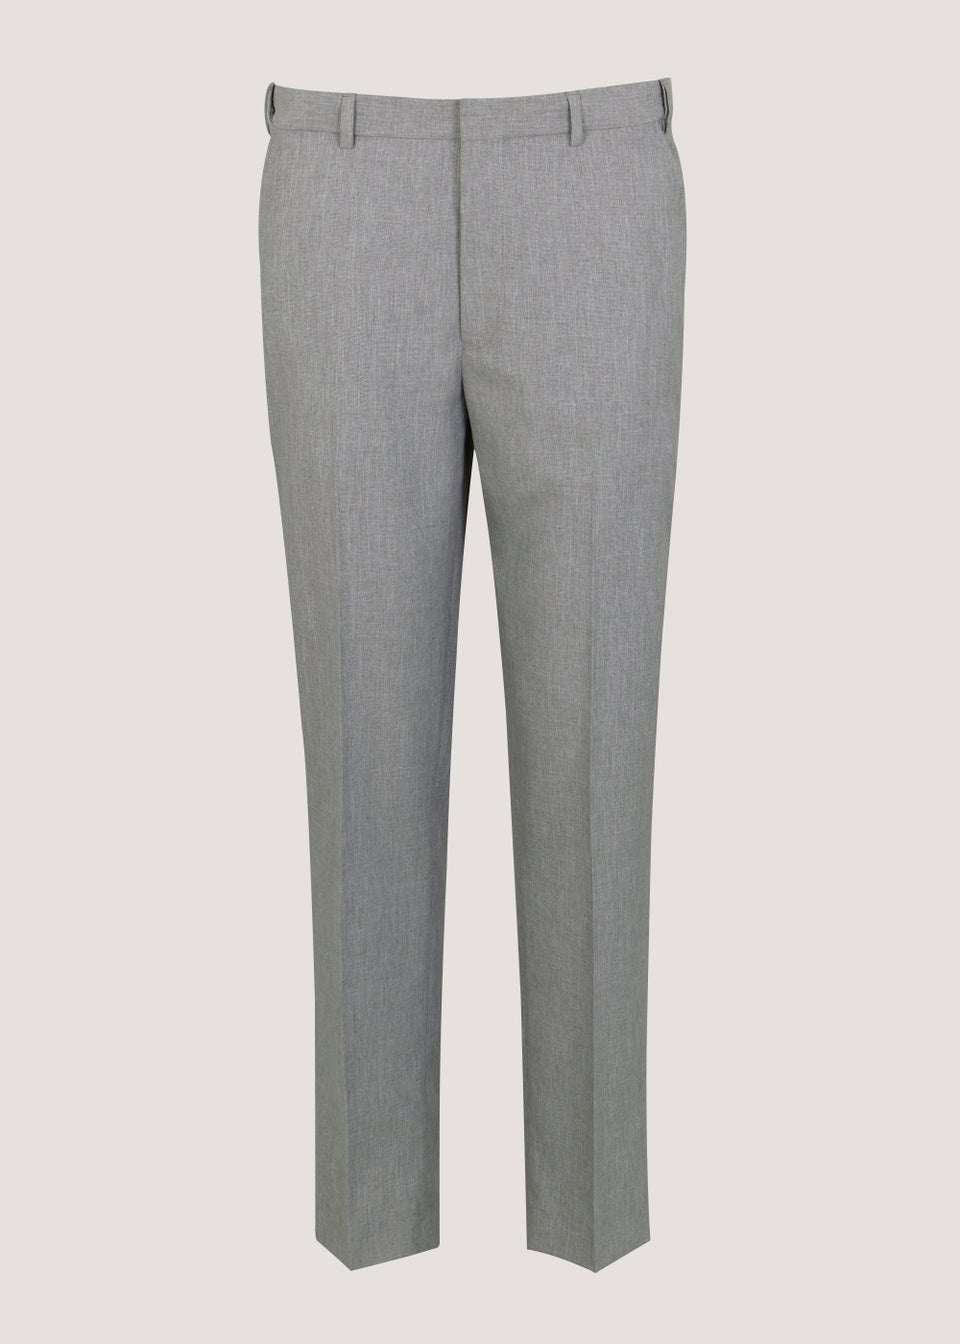 Taylor & Wright Grey Textured Flexi Waist Trousers